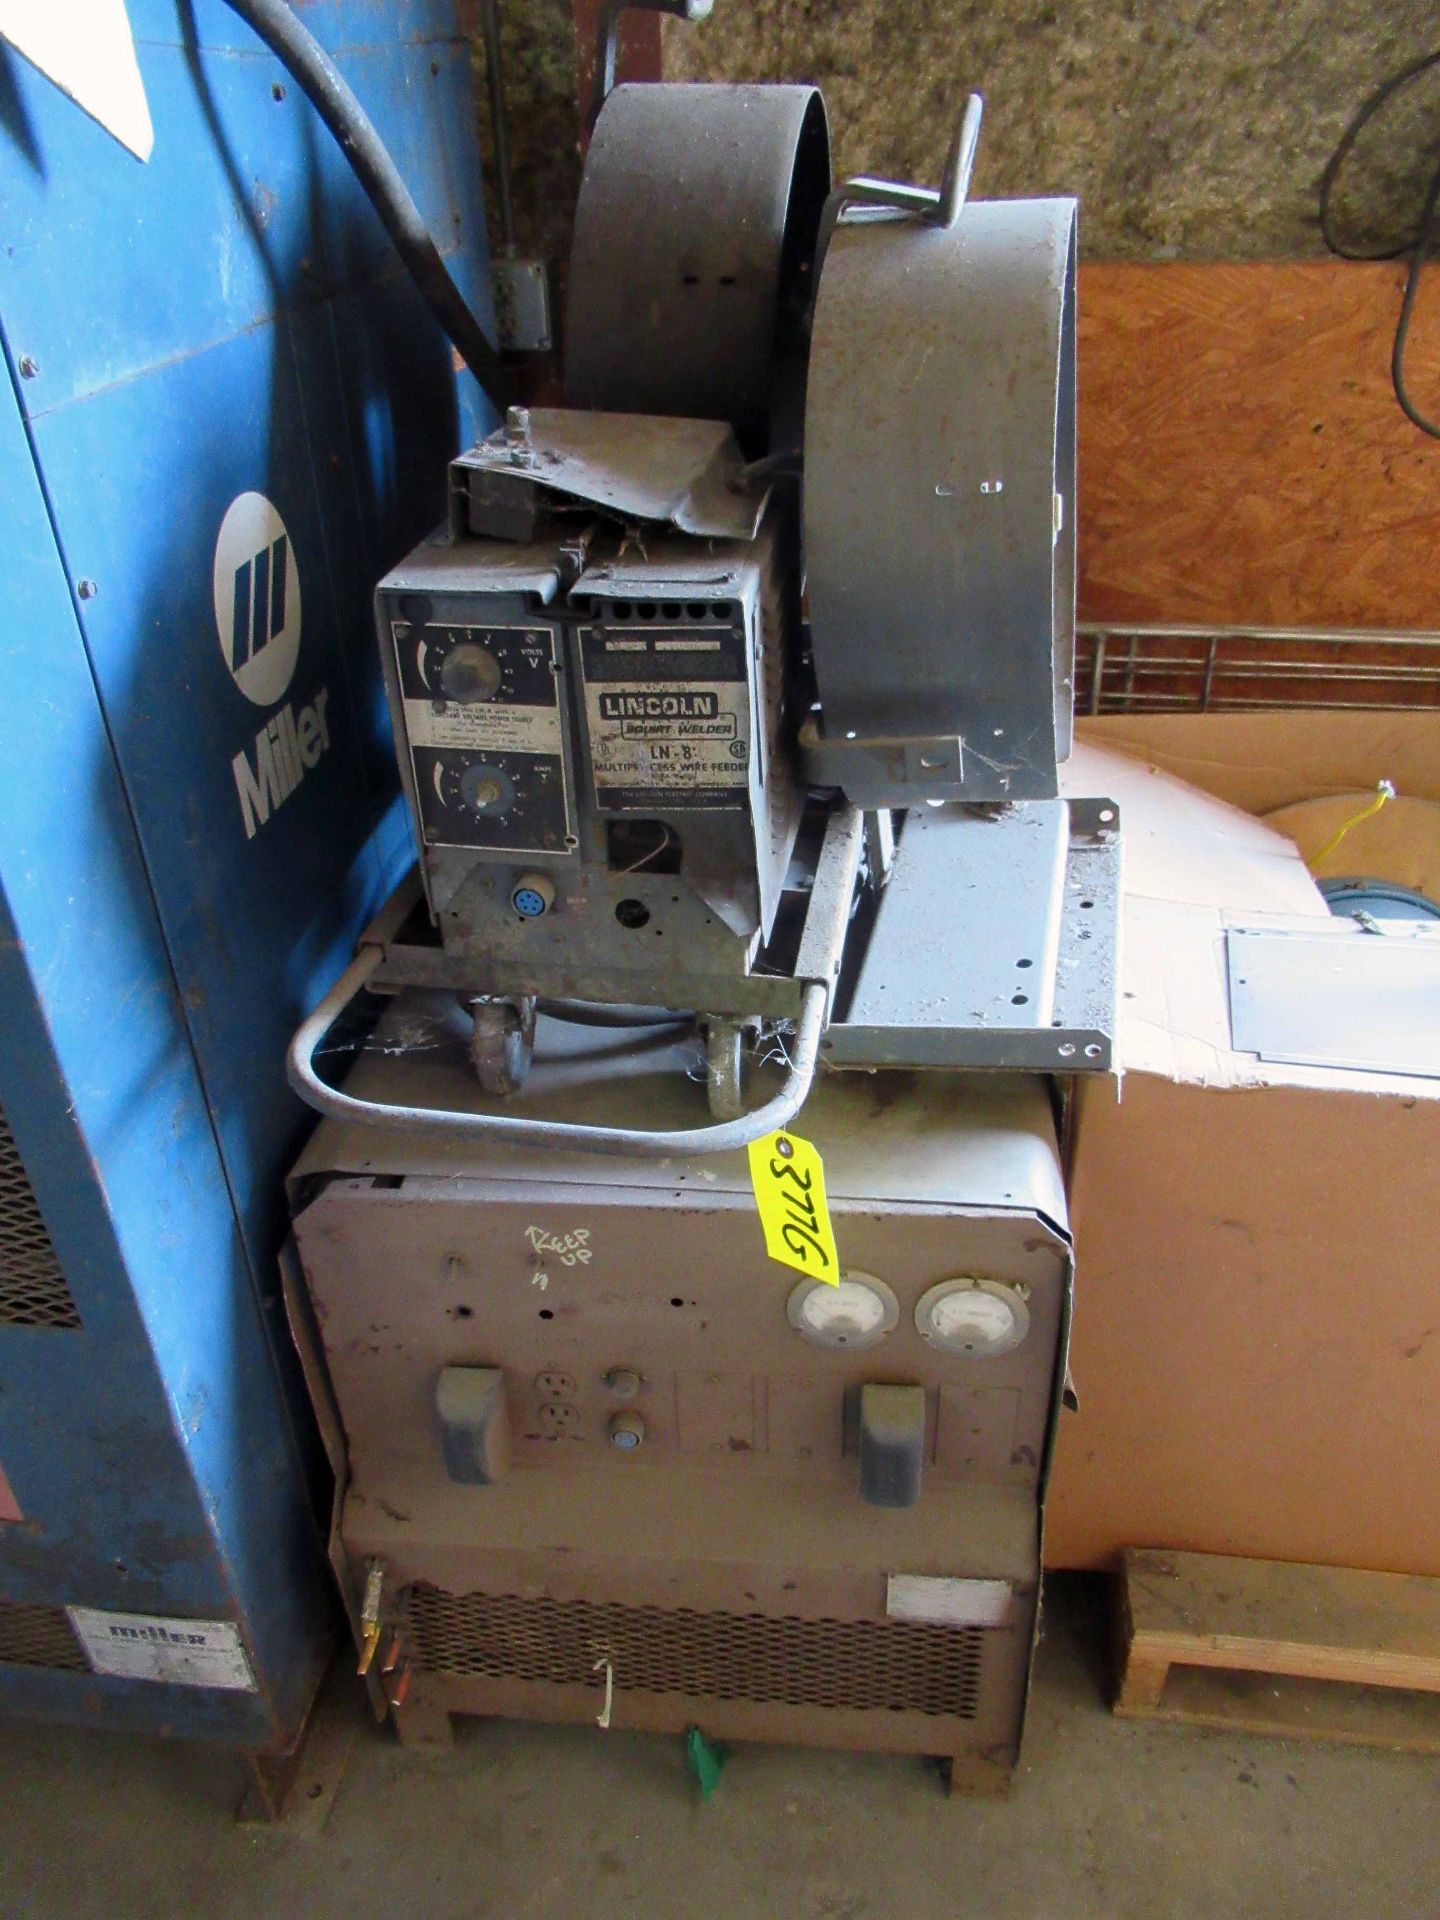 LOT CONSISTING OF: (5) Miller & Lincoln Welders, feeders, TIG 300, etc. (Located at: Precision